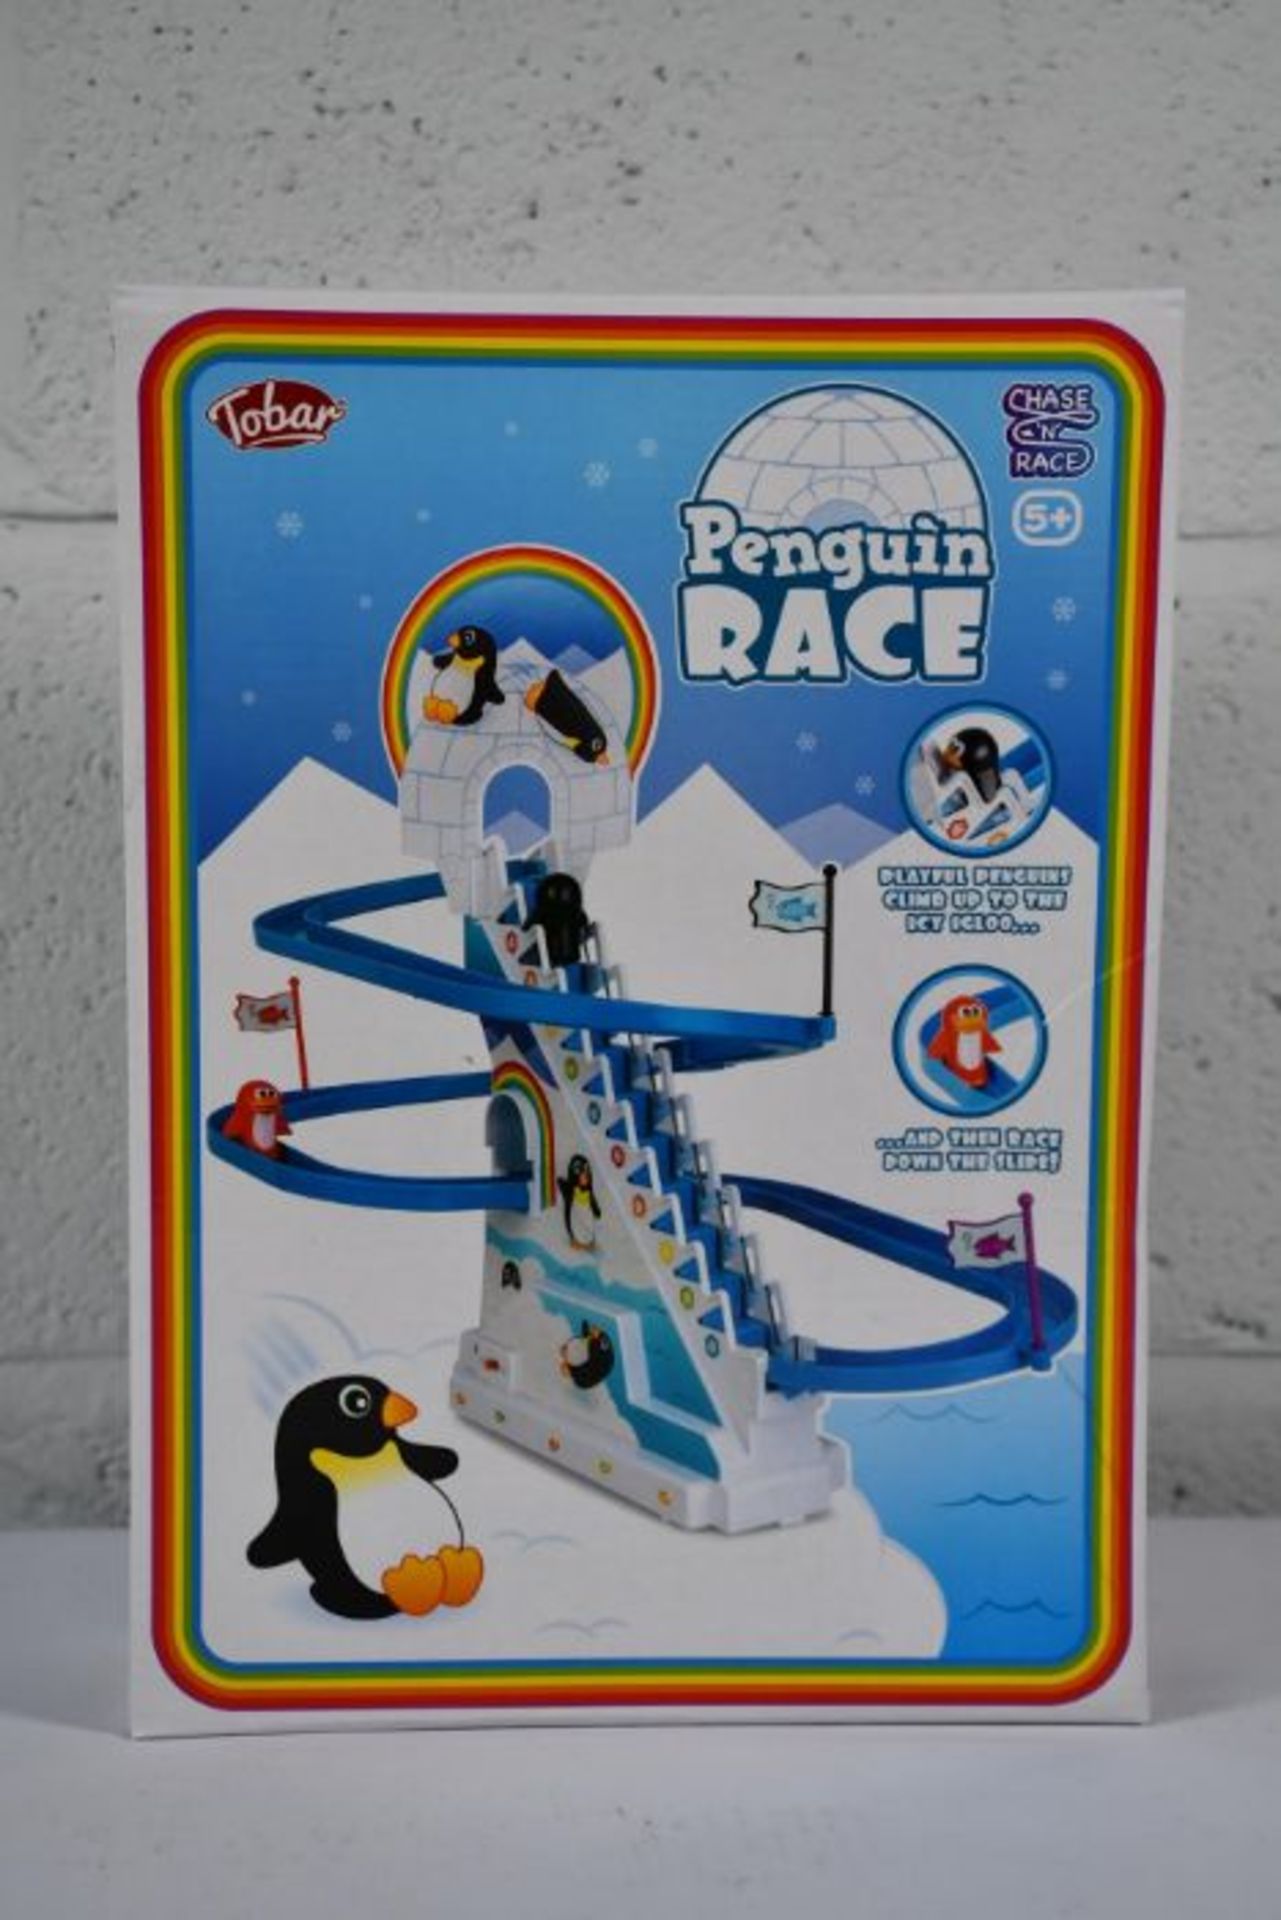 Six boxed as new Tobar Penguin Race Games.